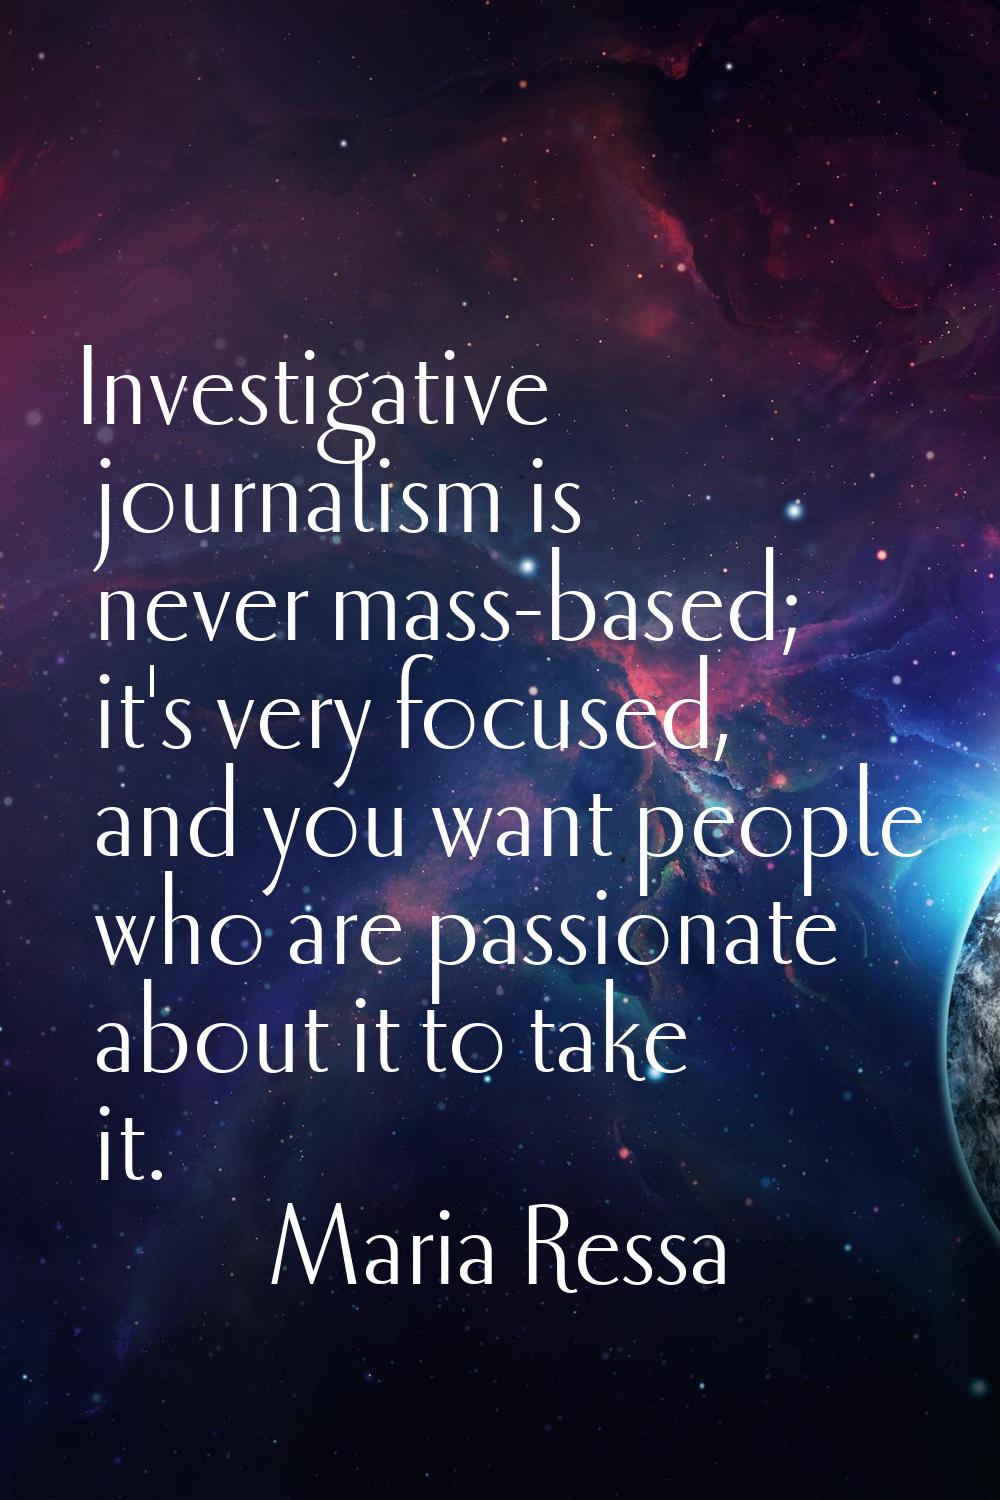 Investigative journalism is never mass-based; it's very focused, and you want people who are passio